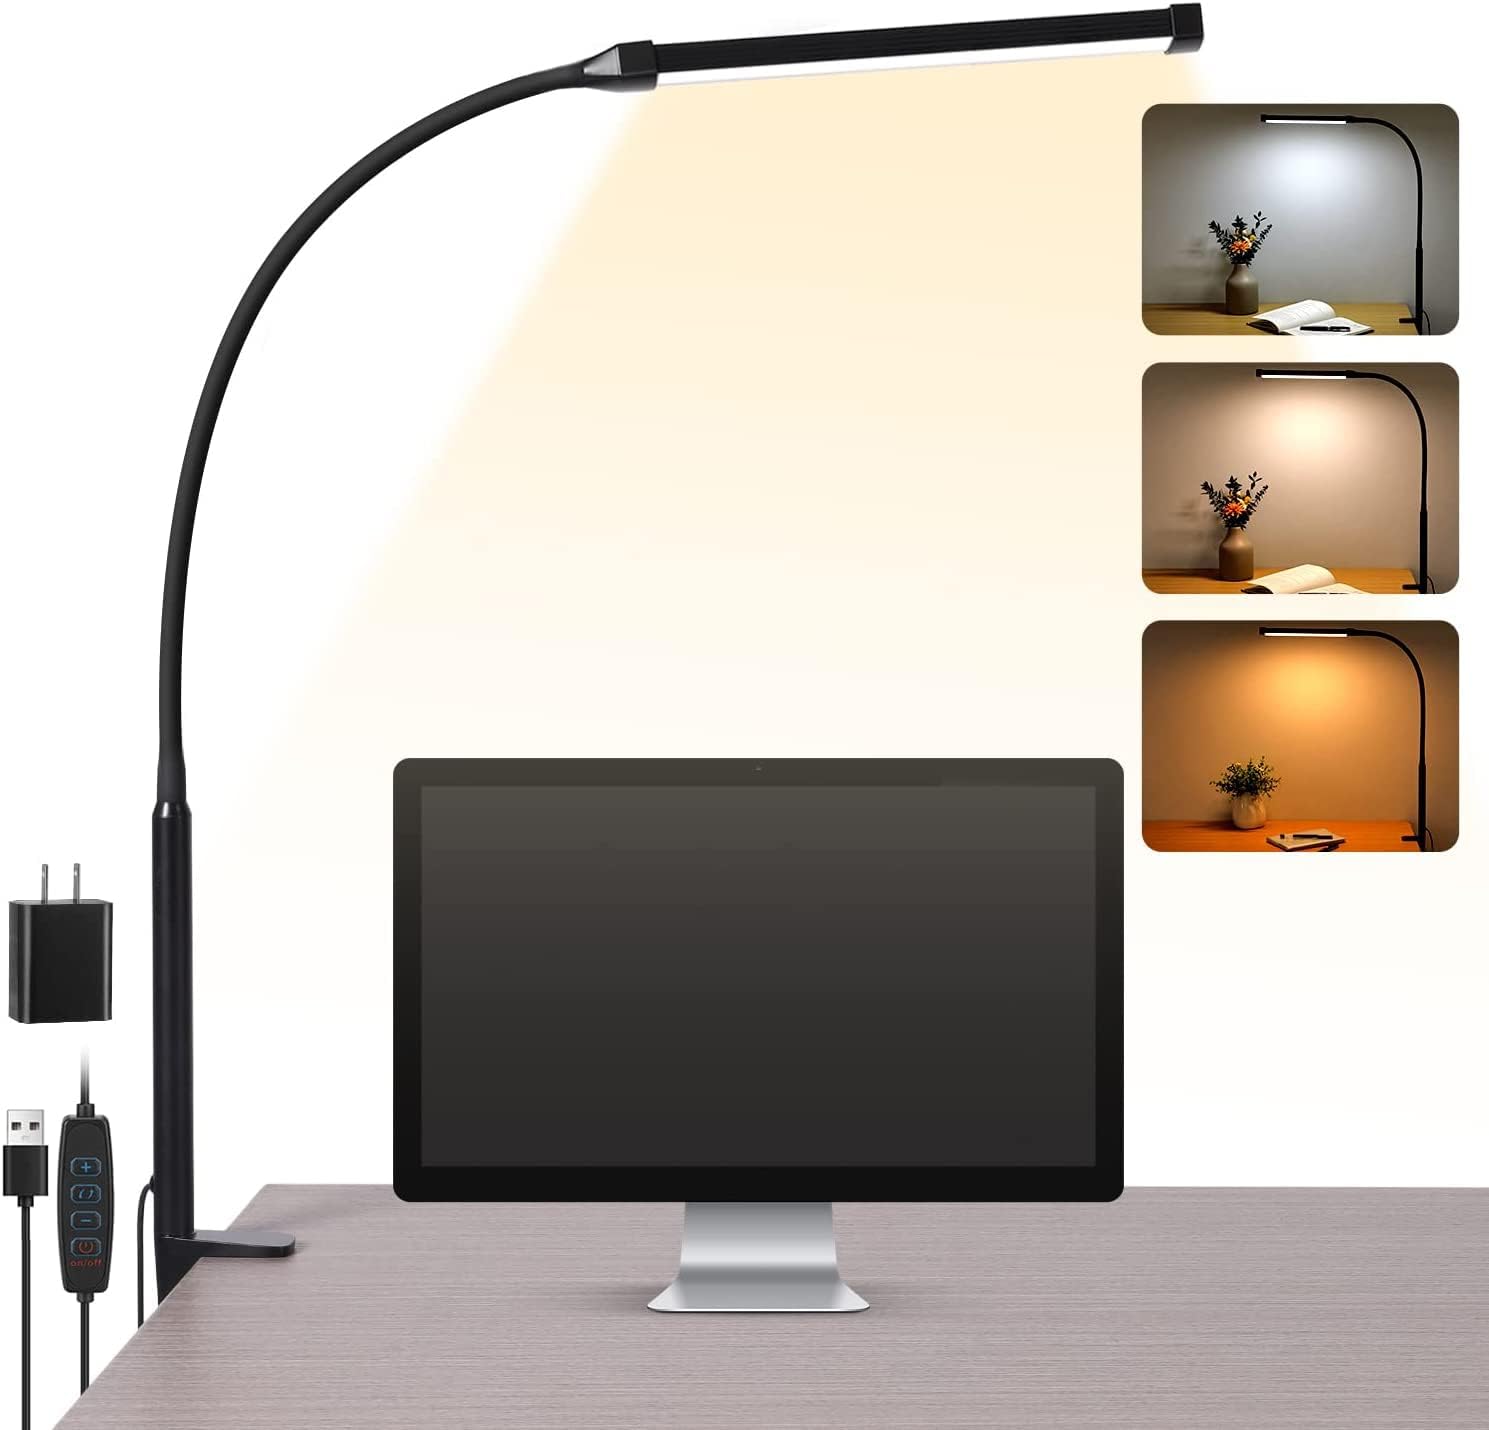 Voncerus LED Desk lamp with Clamp, Eye-Caring Clip on Lights for Home Office, 3 Modes 10 Brightness, Long Flexible Gooseneck,Metal, Swin